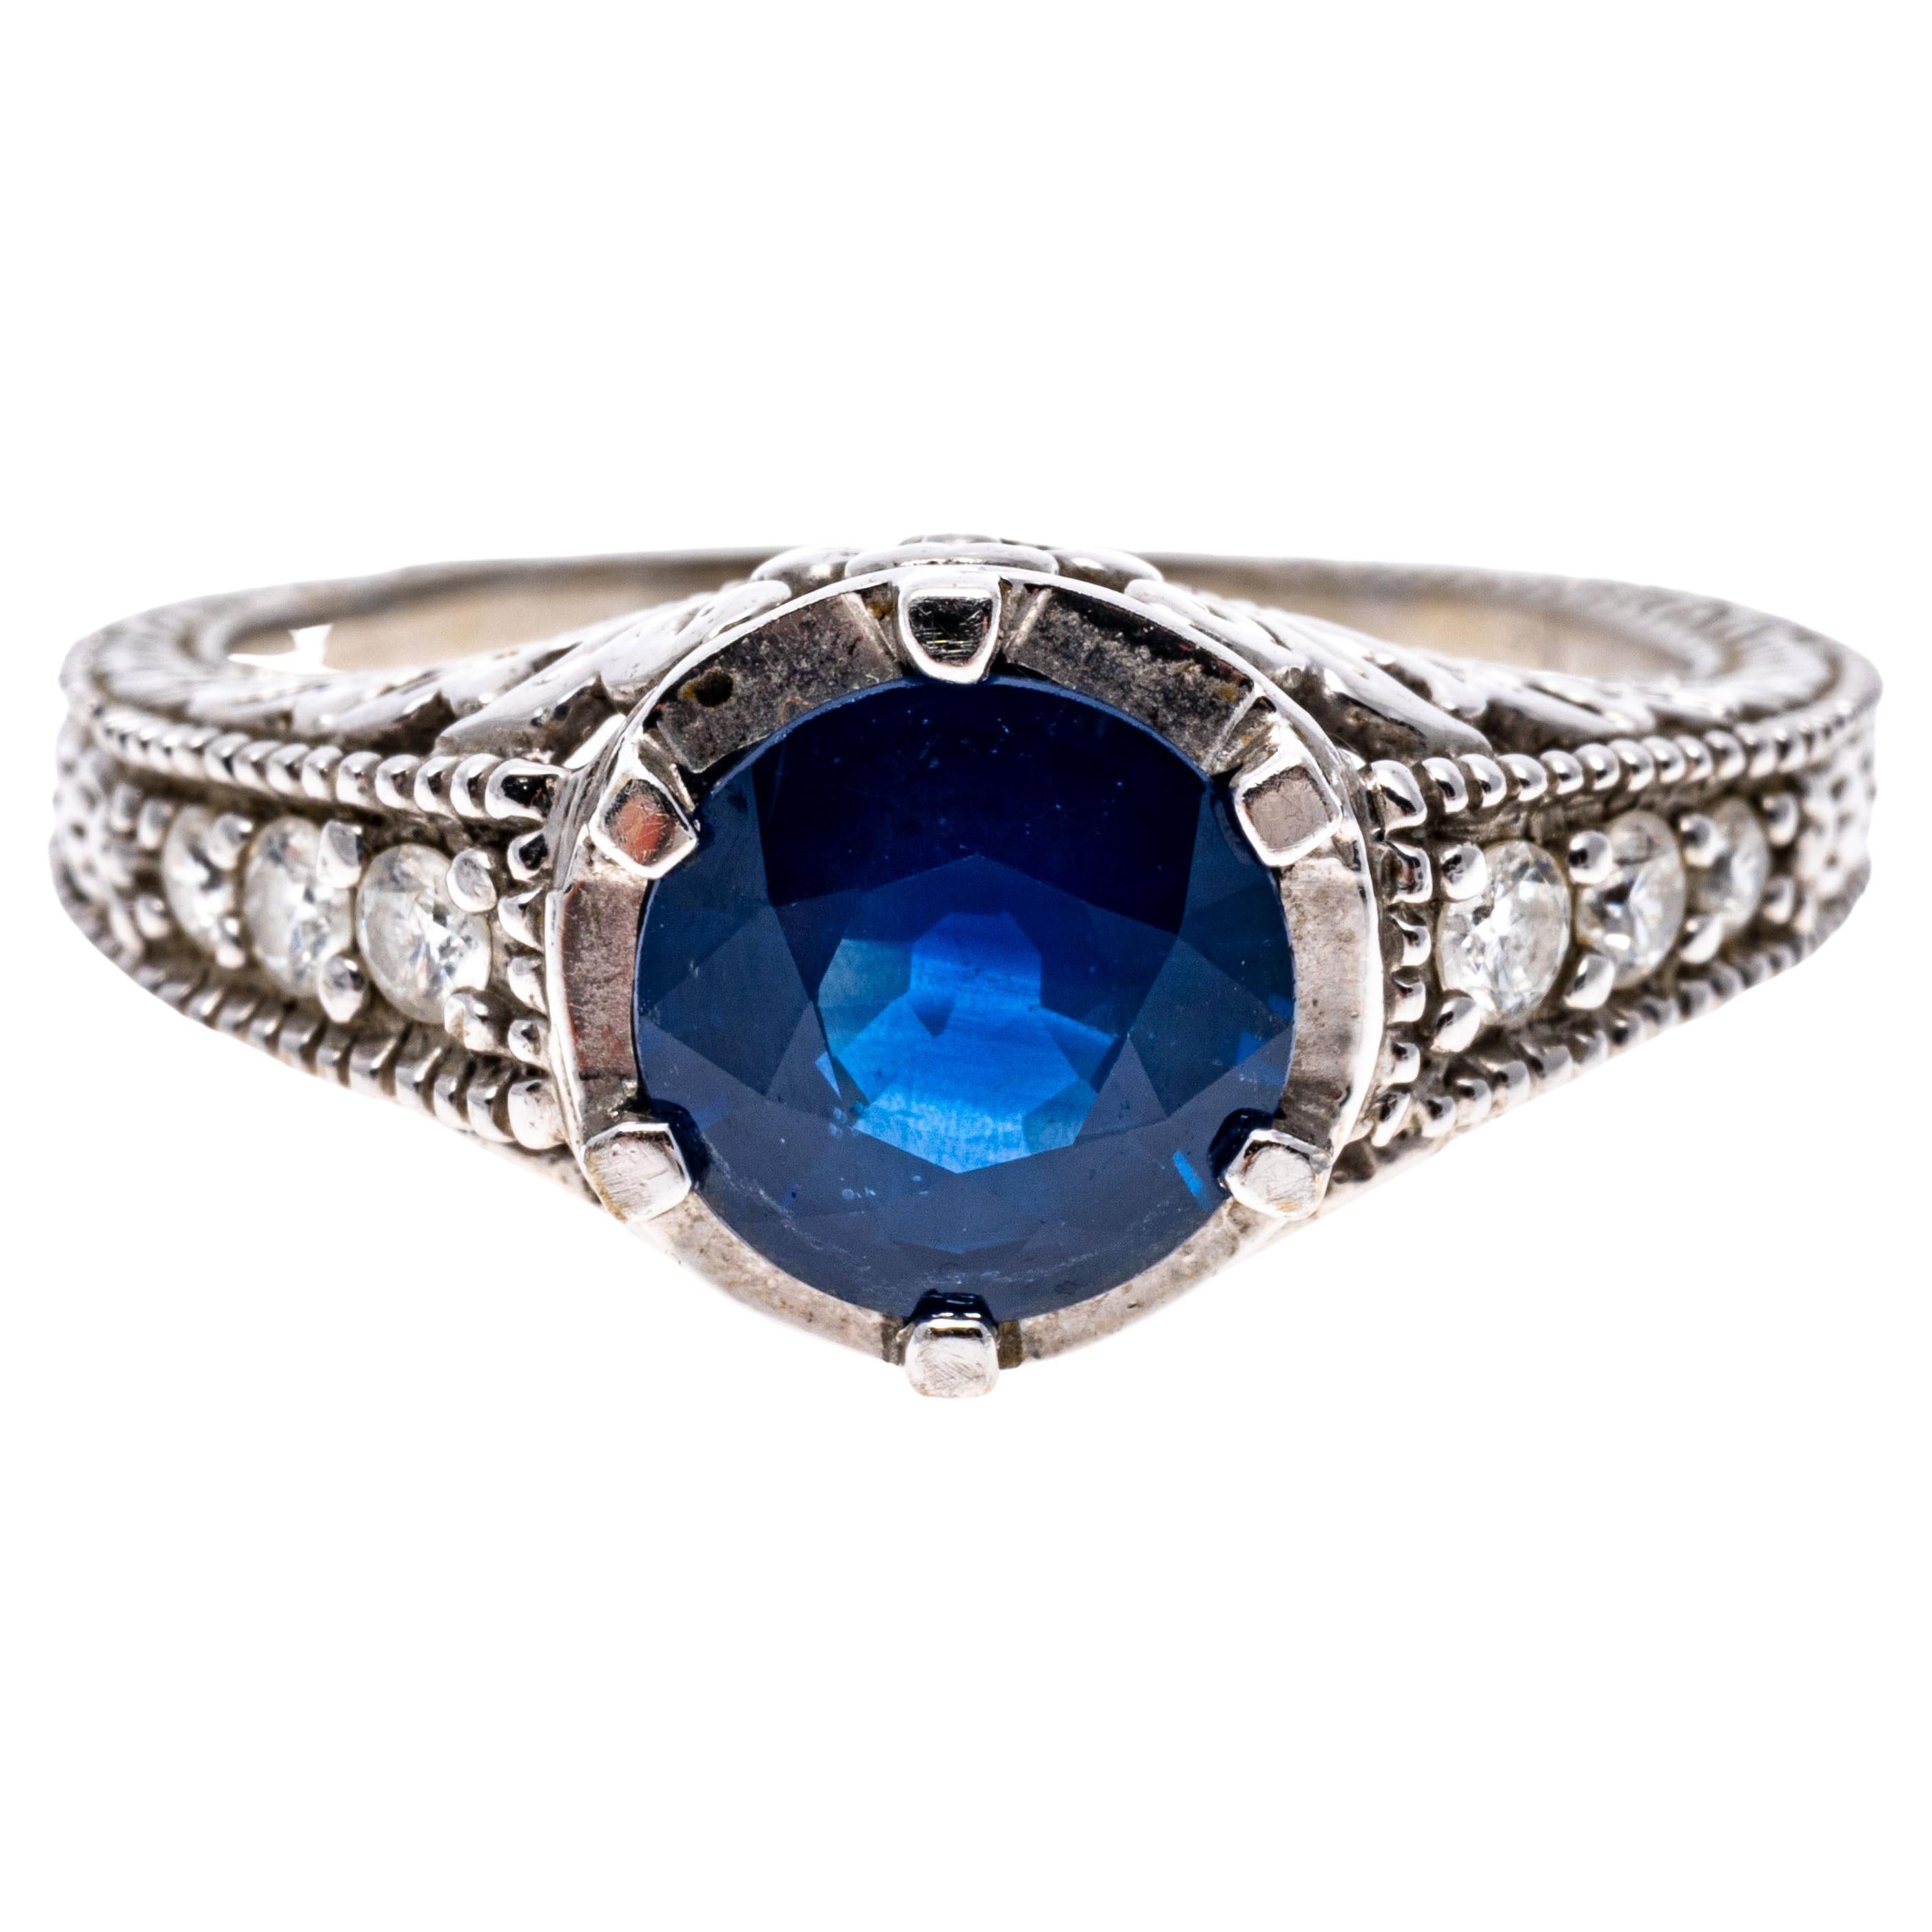 14k White Gold Round Blue Sapphire, 1.44 CTS And Diamond Ring.
This impressive ring has a round faceted sapphire center stone of navy blue color, 1.44 CTS with a white gold halo, flanked by near colorless round brilliant cut diamonds, approximately